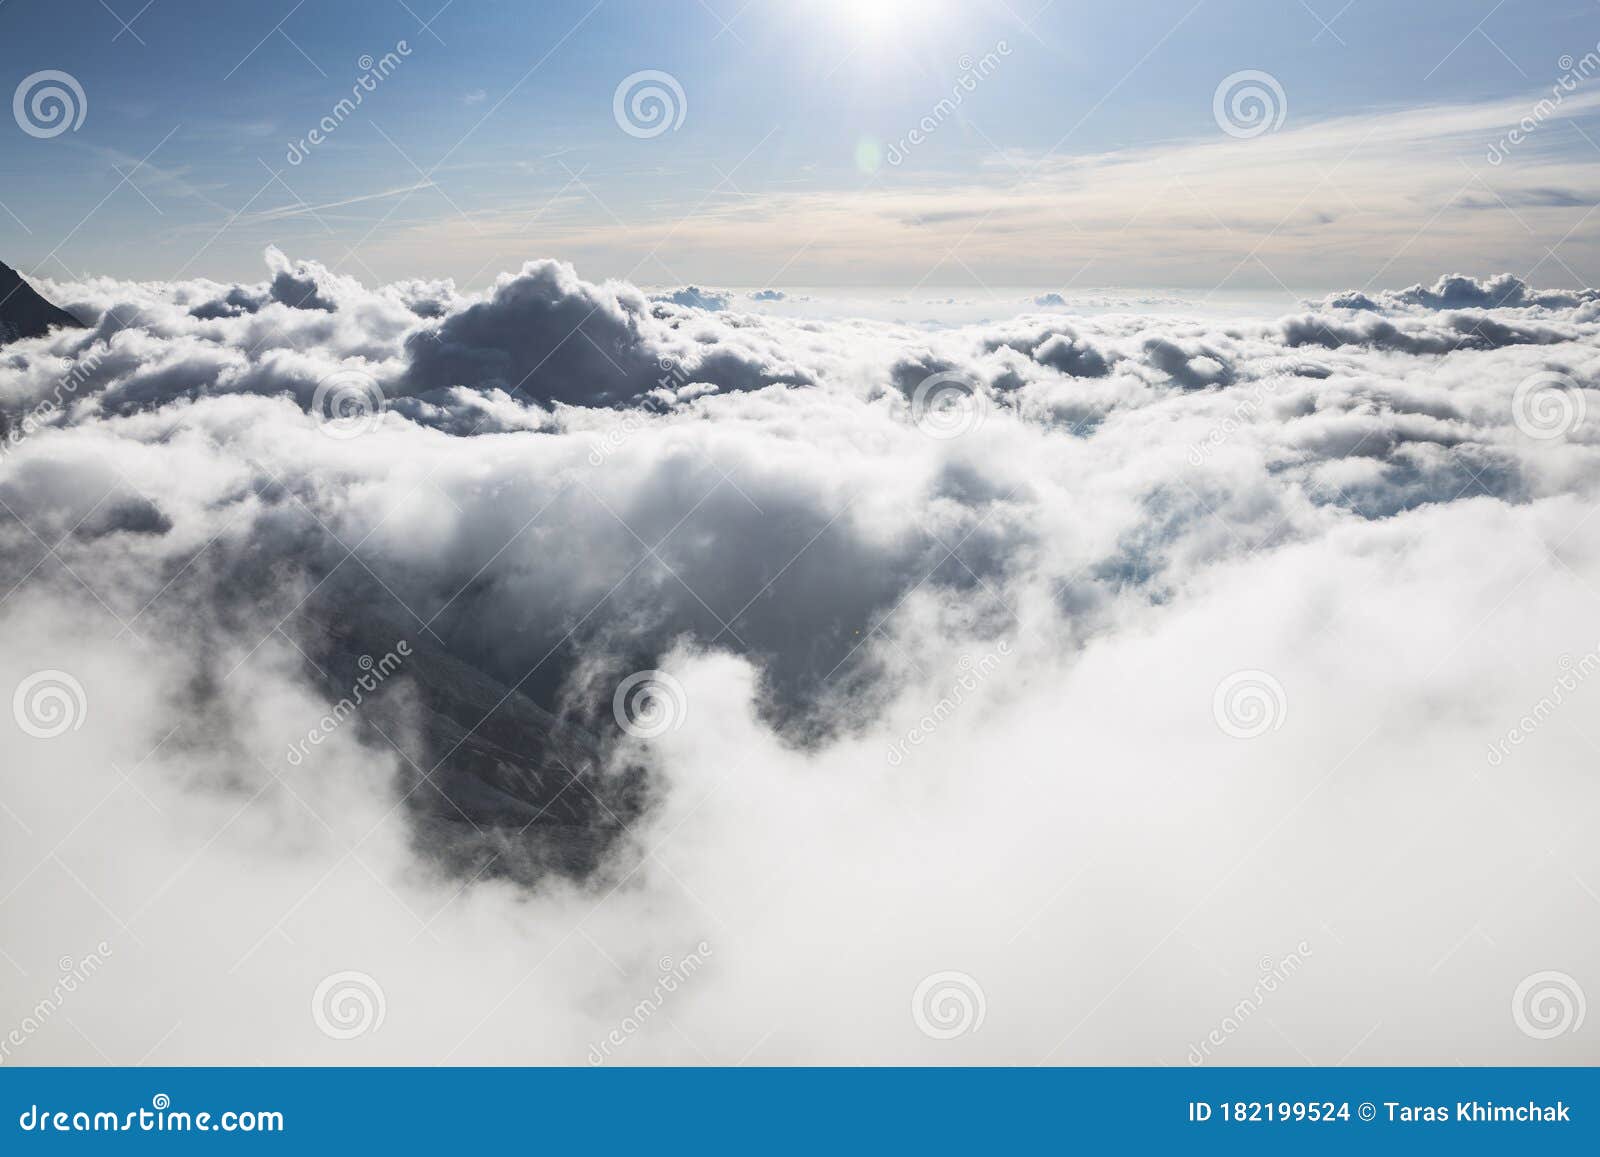 clouds and fog over the chamonix valley. view from the cosmique refuge, chamonix, france. perfect moment in alpine highlands